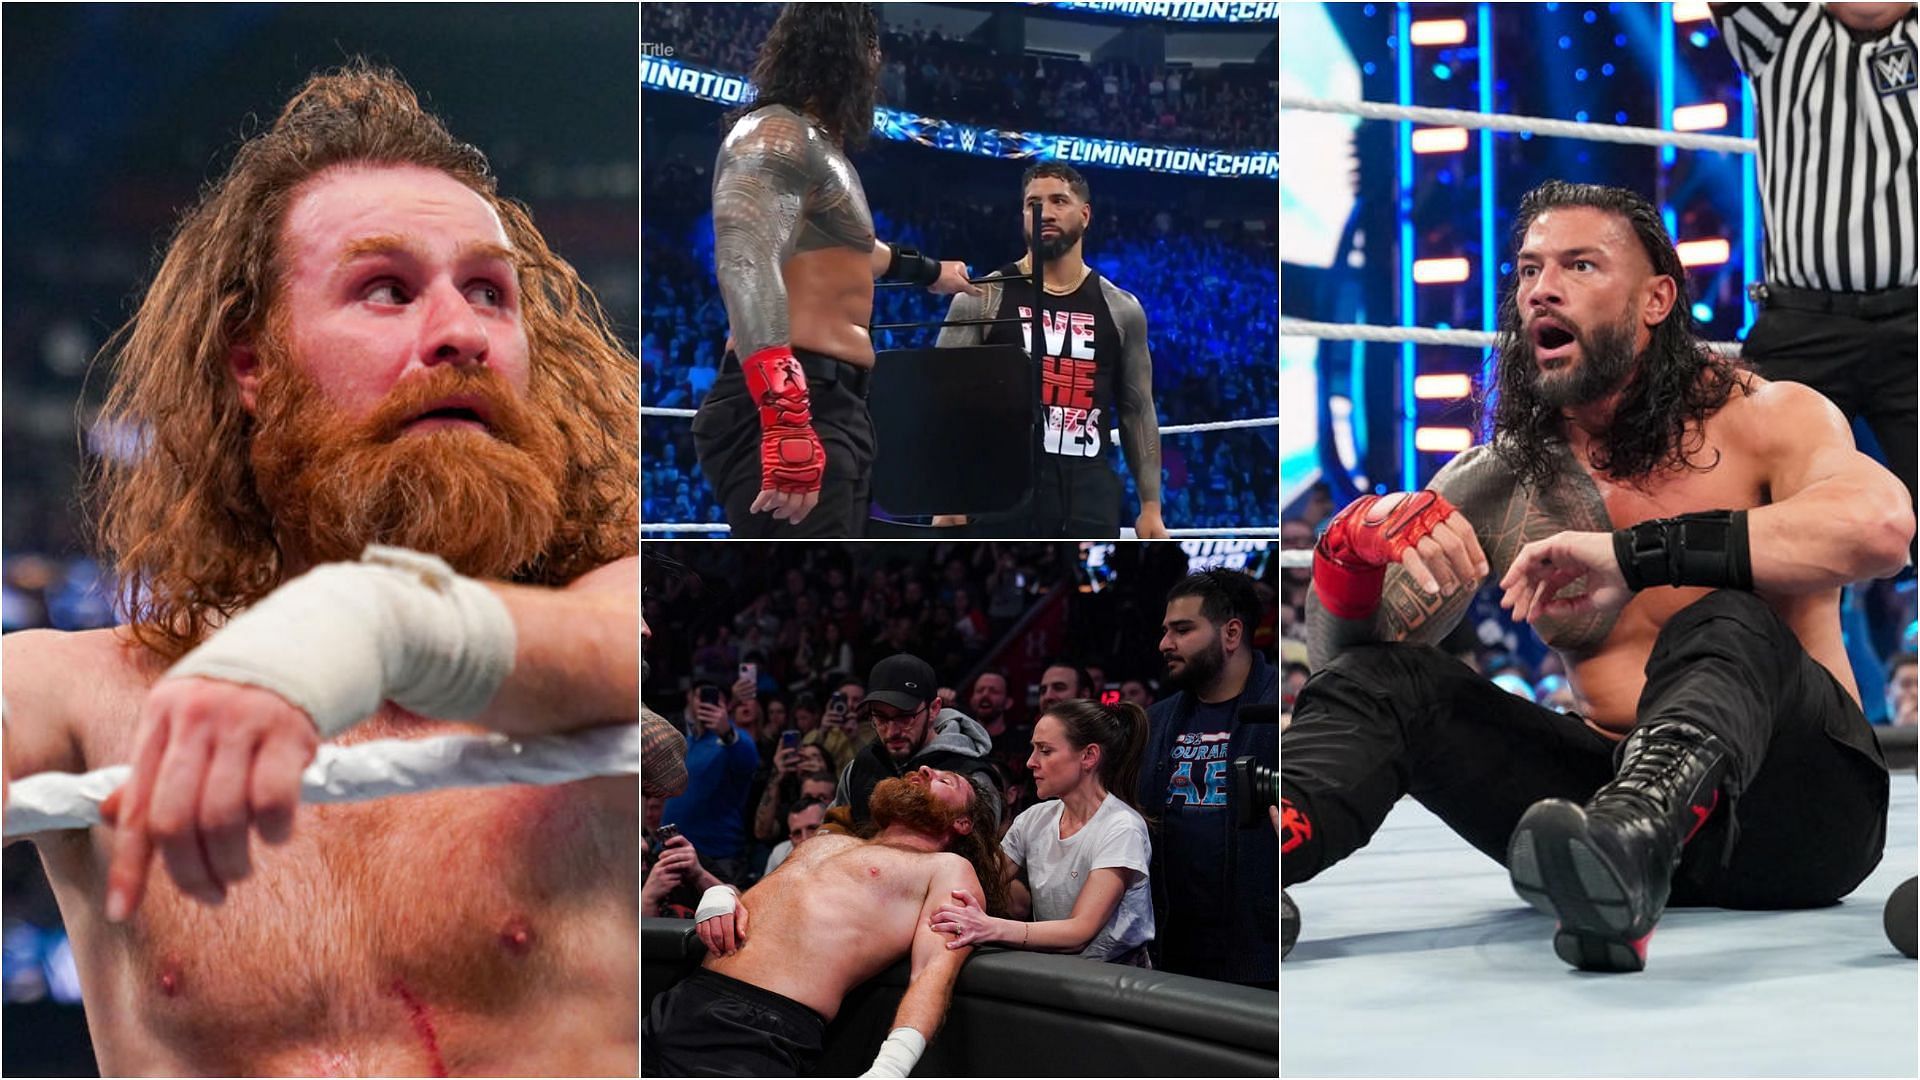 Roman Reigns vs Sami Zayn was, to many fans, an absolute masterpiece